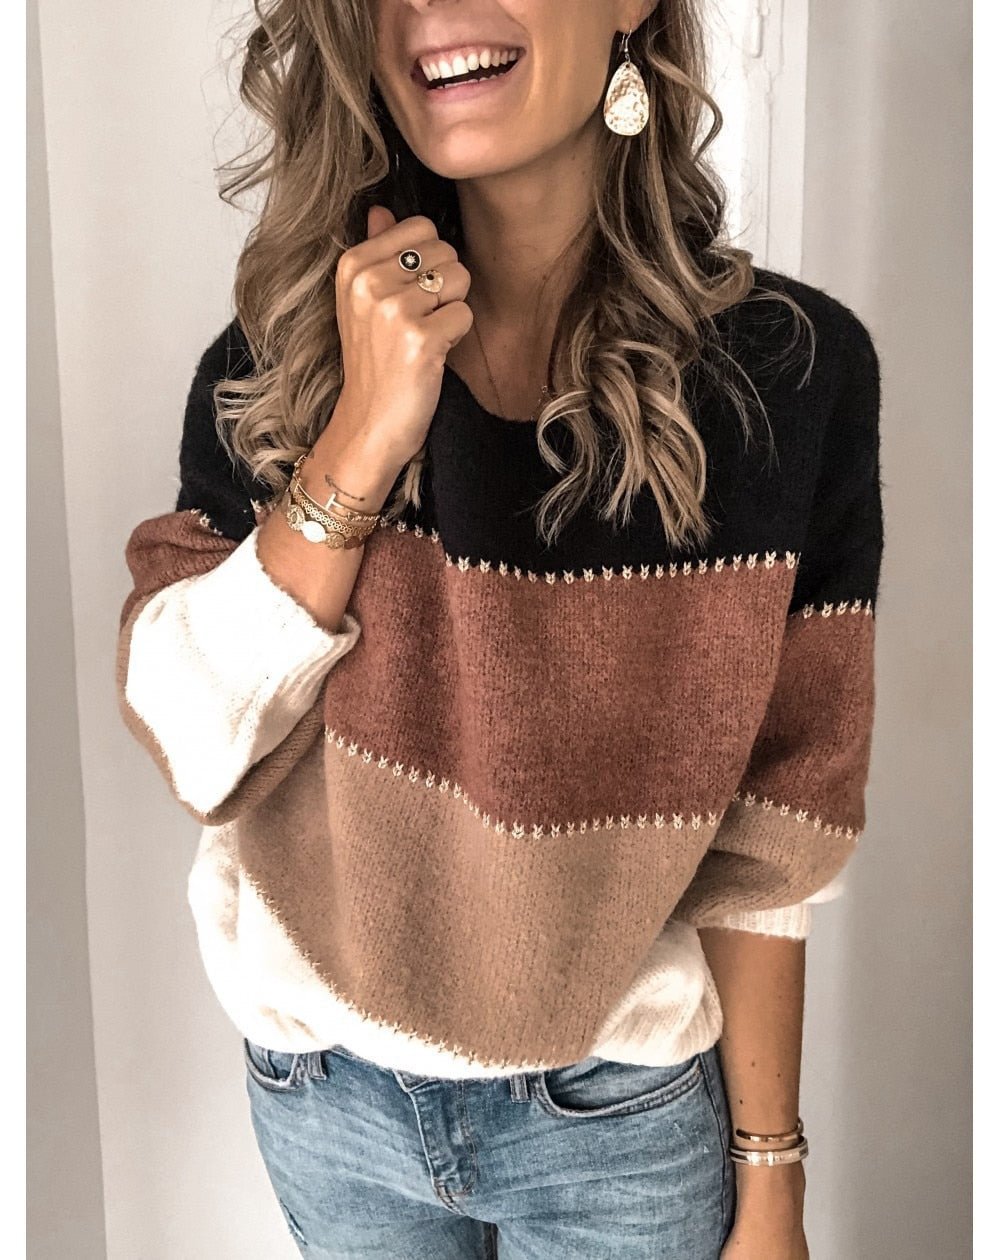 Women's 2021 autumn and winter new solid color stitching knit sweater top casual contrast color round neck sweater women